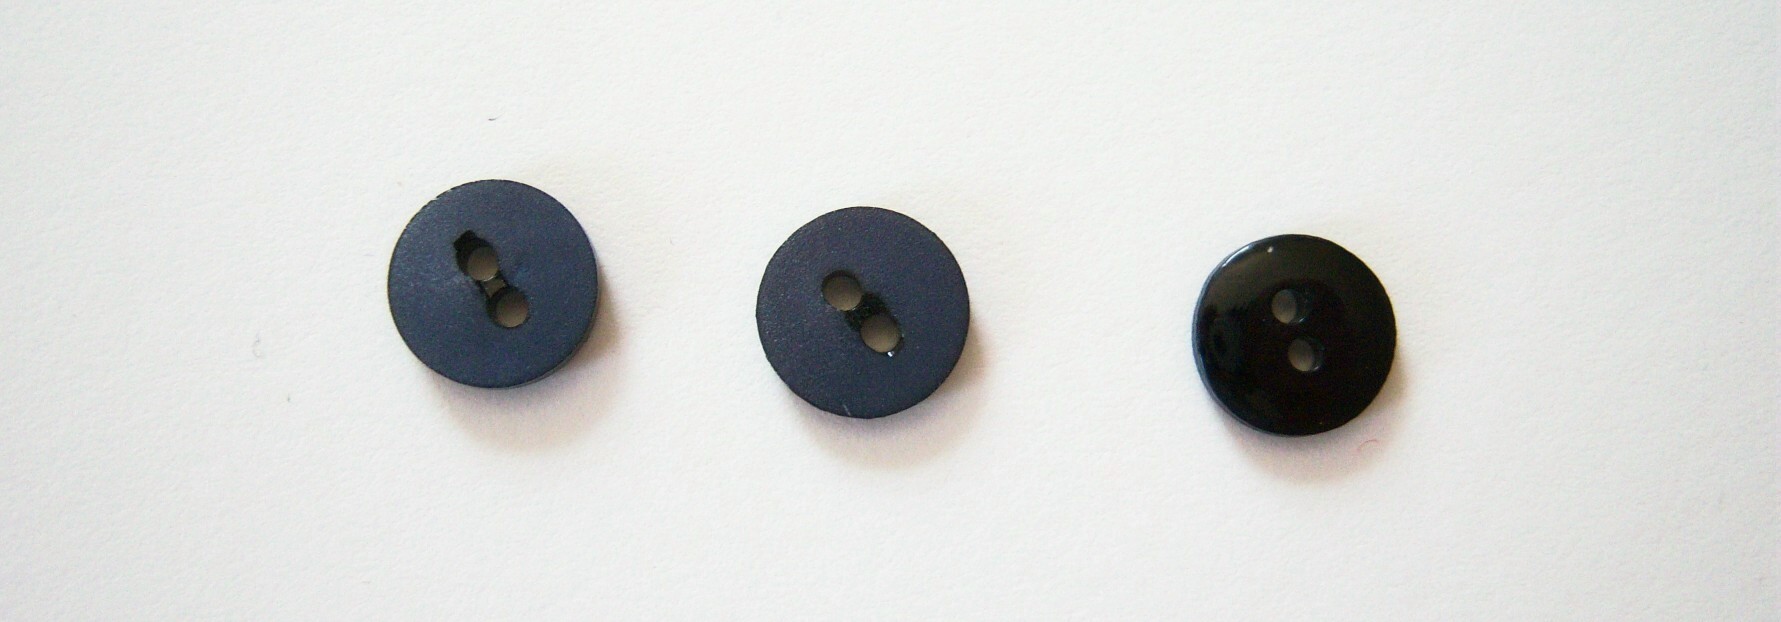 Frosted Navy Black Back 7/16" 2 Hole Button